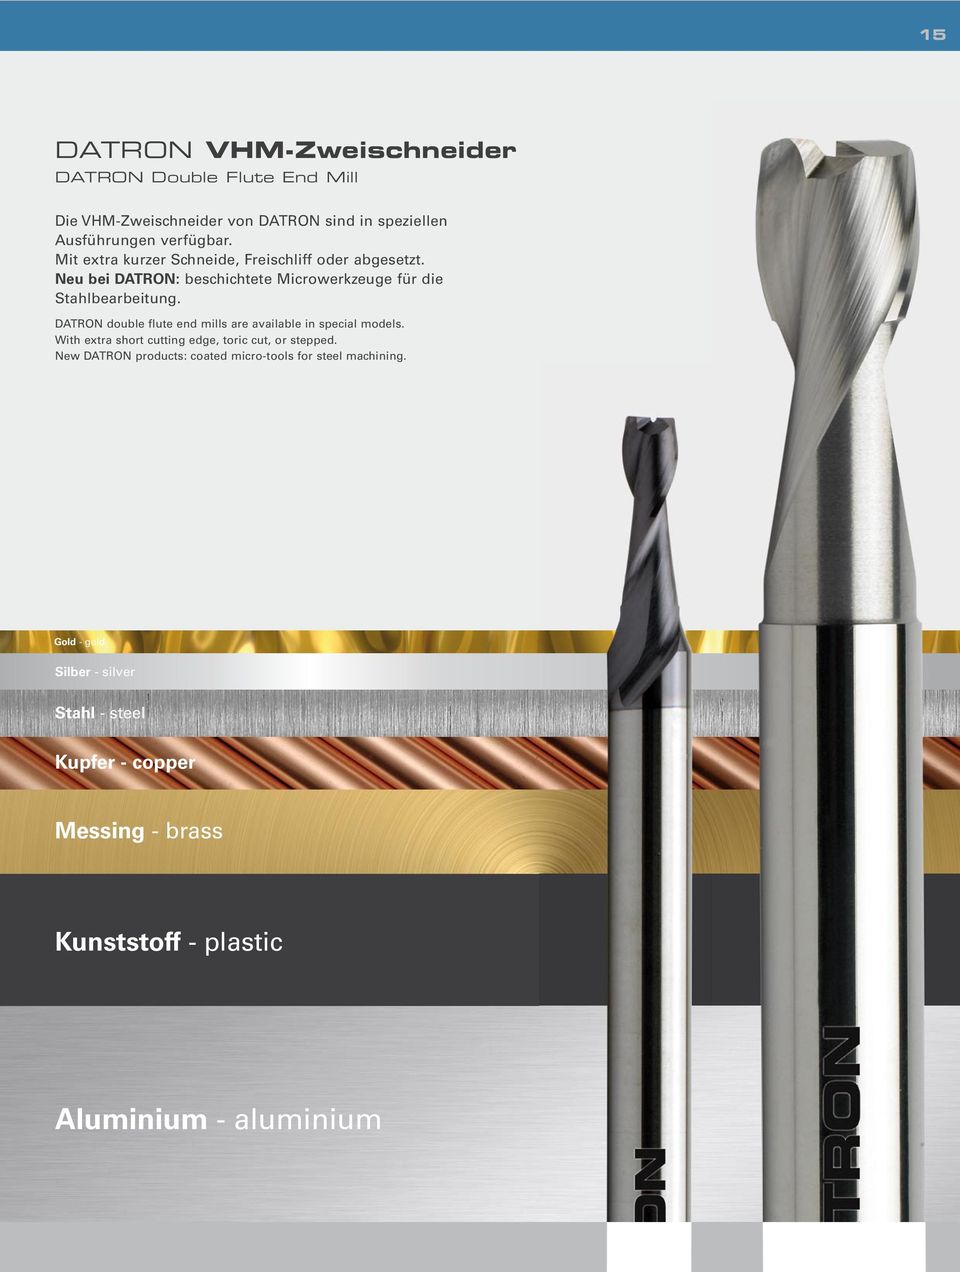 DATRON double flute end mills are available in special models. With extra short cutting edge, toric cut, or stepped.